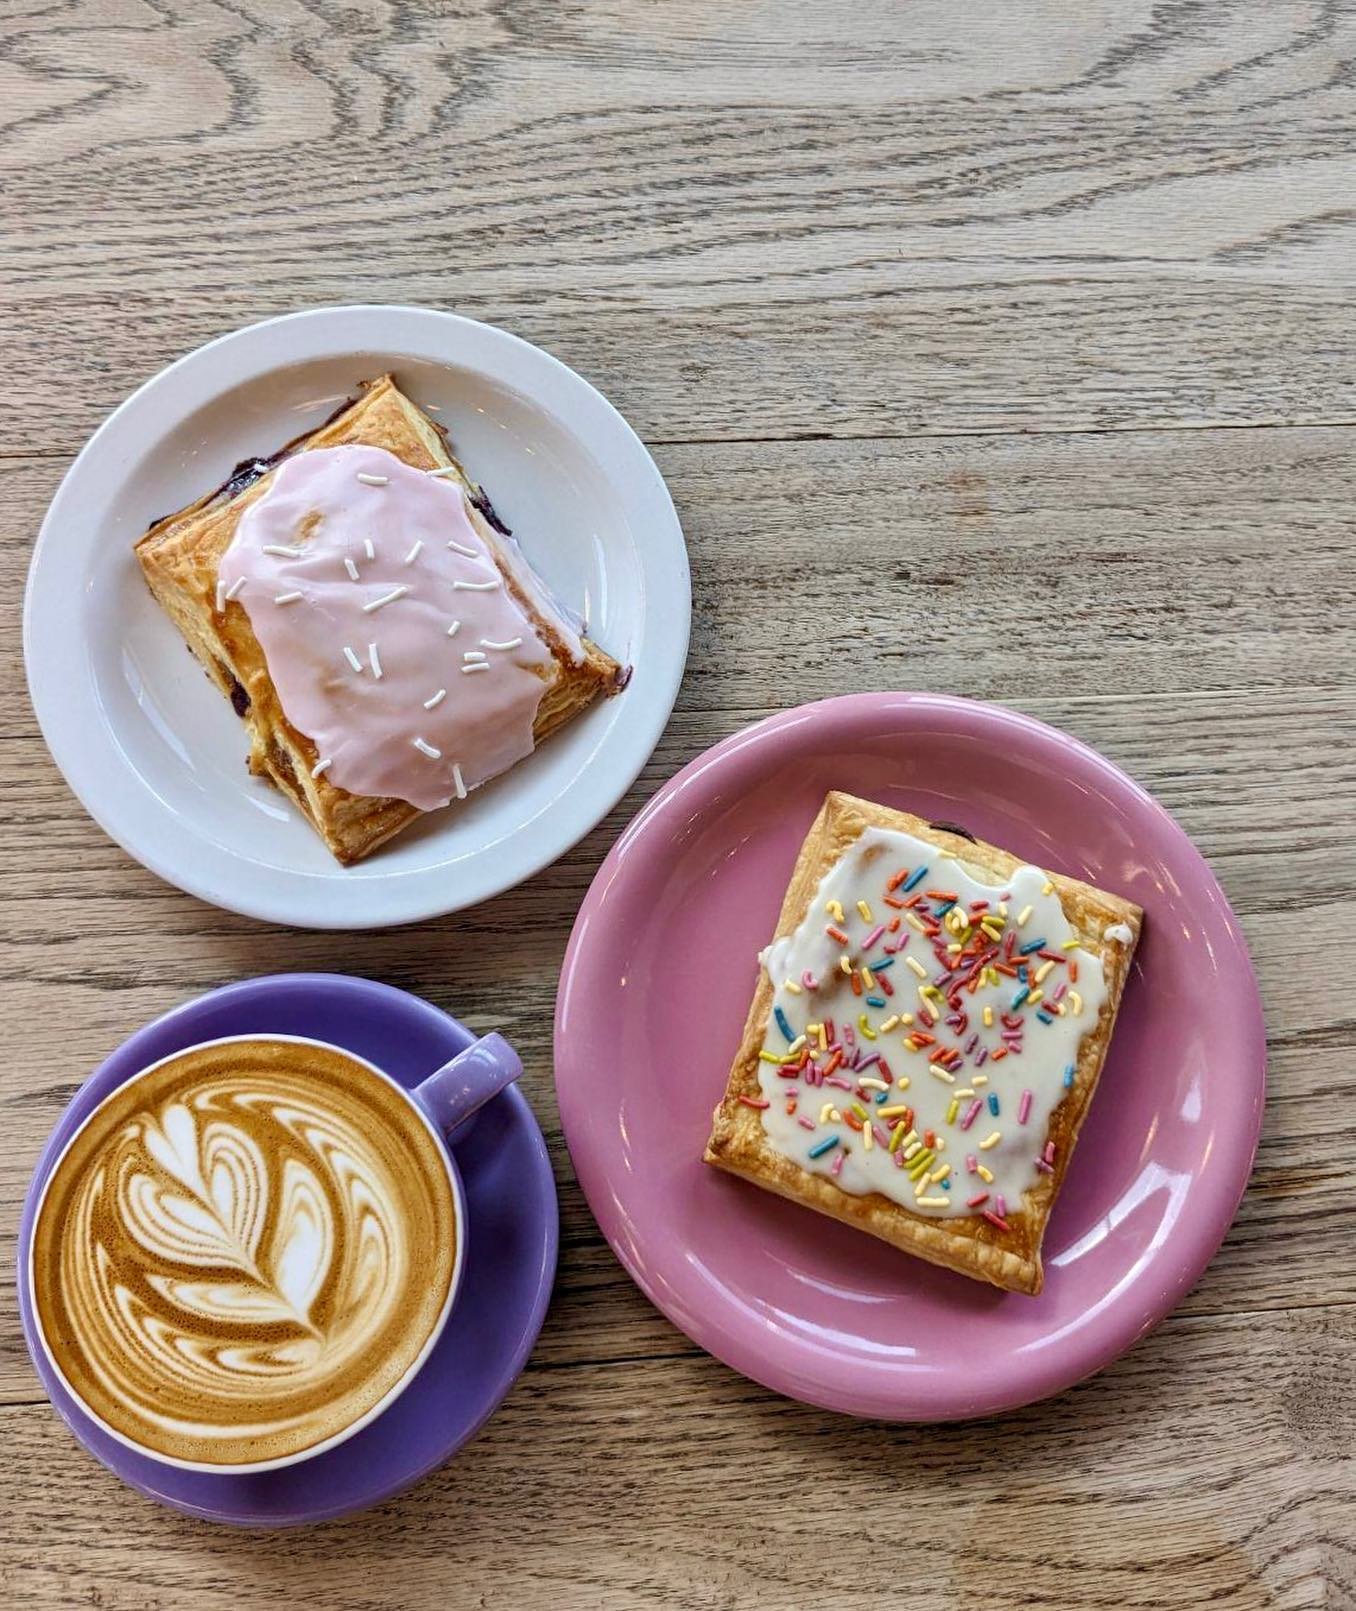 Happy Saturday Caldwell - We got both Nutella and Strawberry/Blueberry Poptarts in the case today, thanks bakers! 🤤

Come say hey &amp; get a treat while you&rsquo;re checking out the Rugged Idaho Expo in the plaza 🥾 

Lovely pour by lovely Aaron!